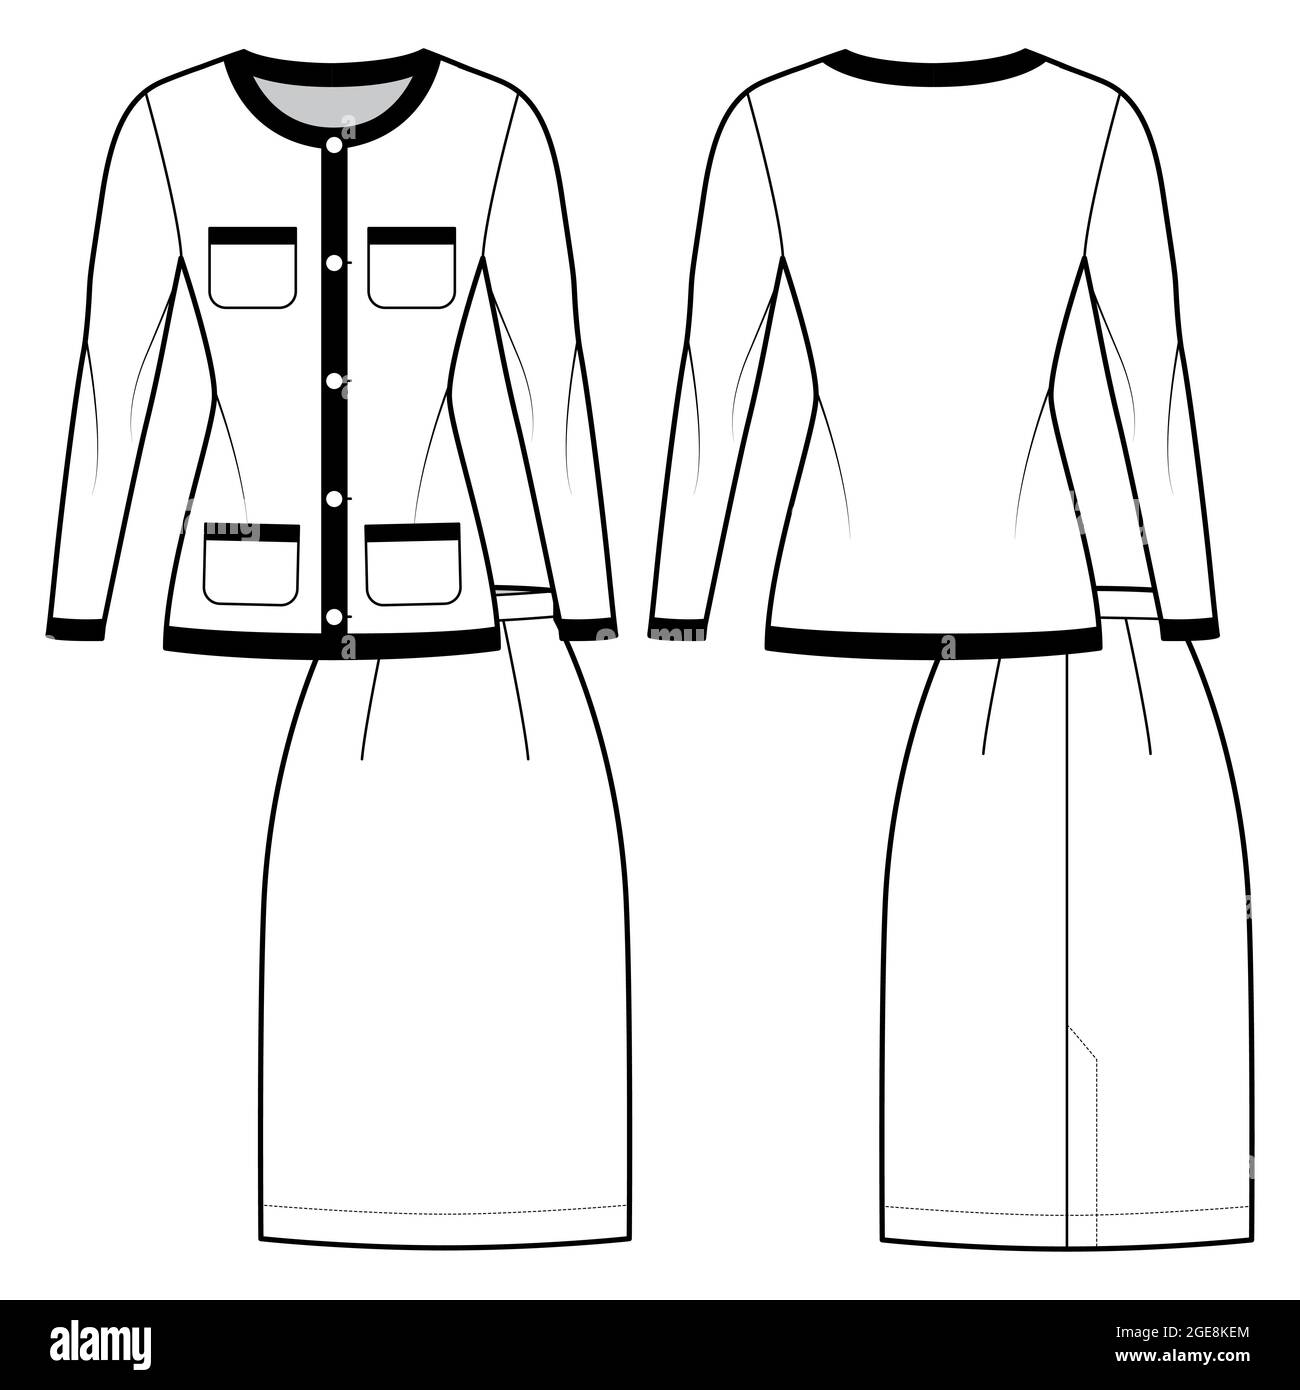 Set of Suit Chanel - style - classic skirt and blazer technical fashion  illustration with two - pieces, knee